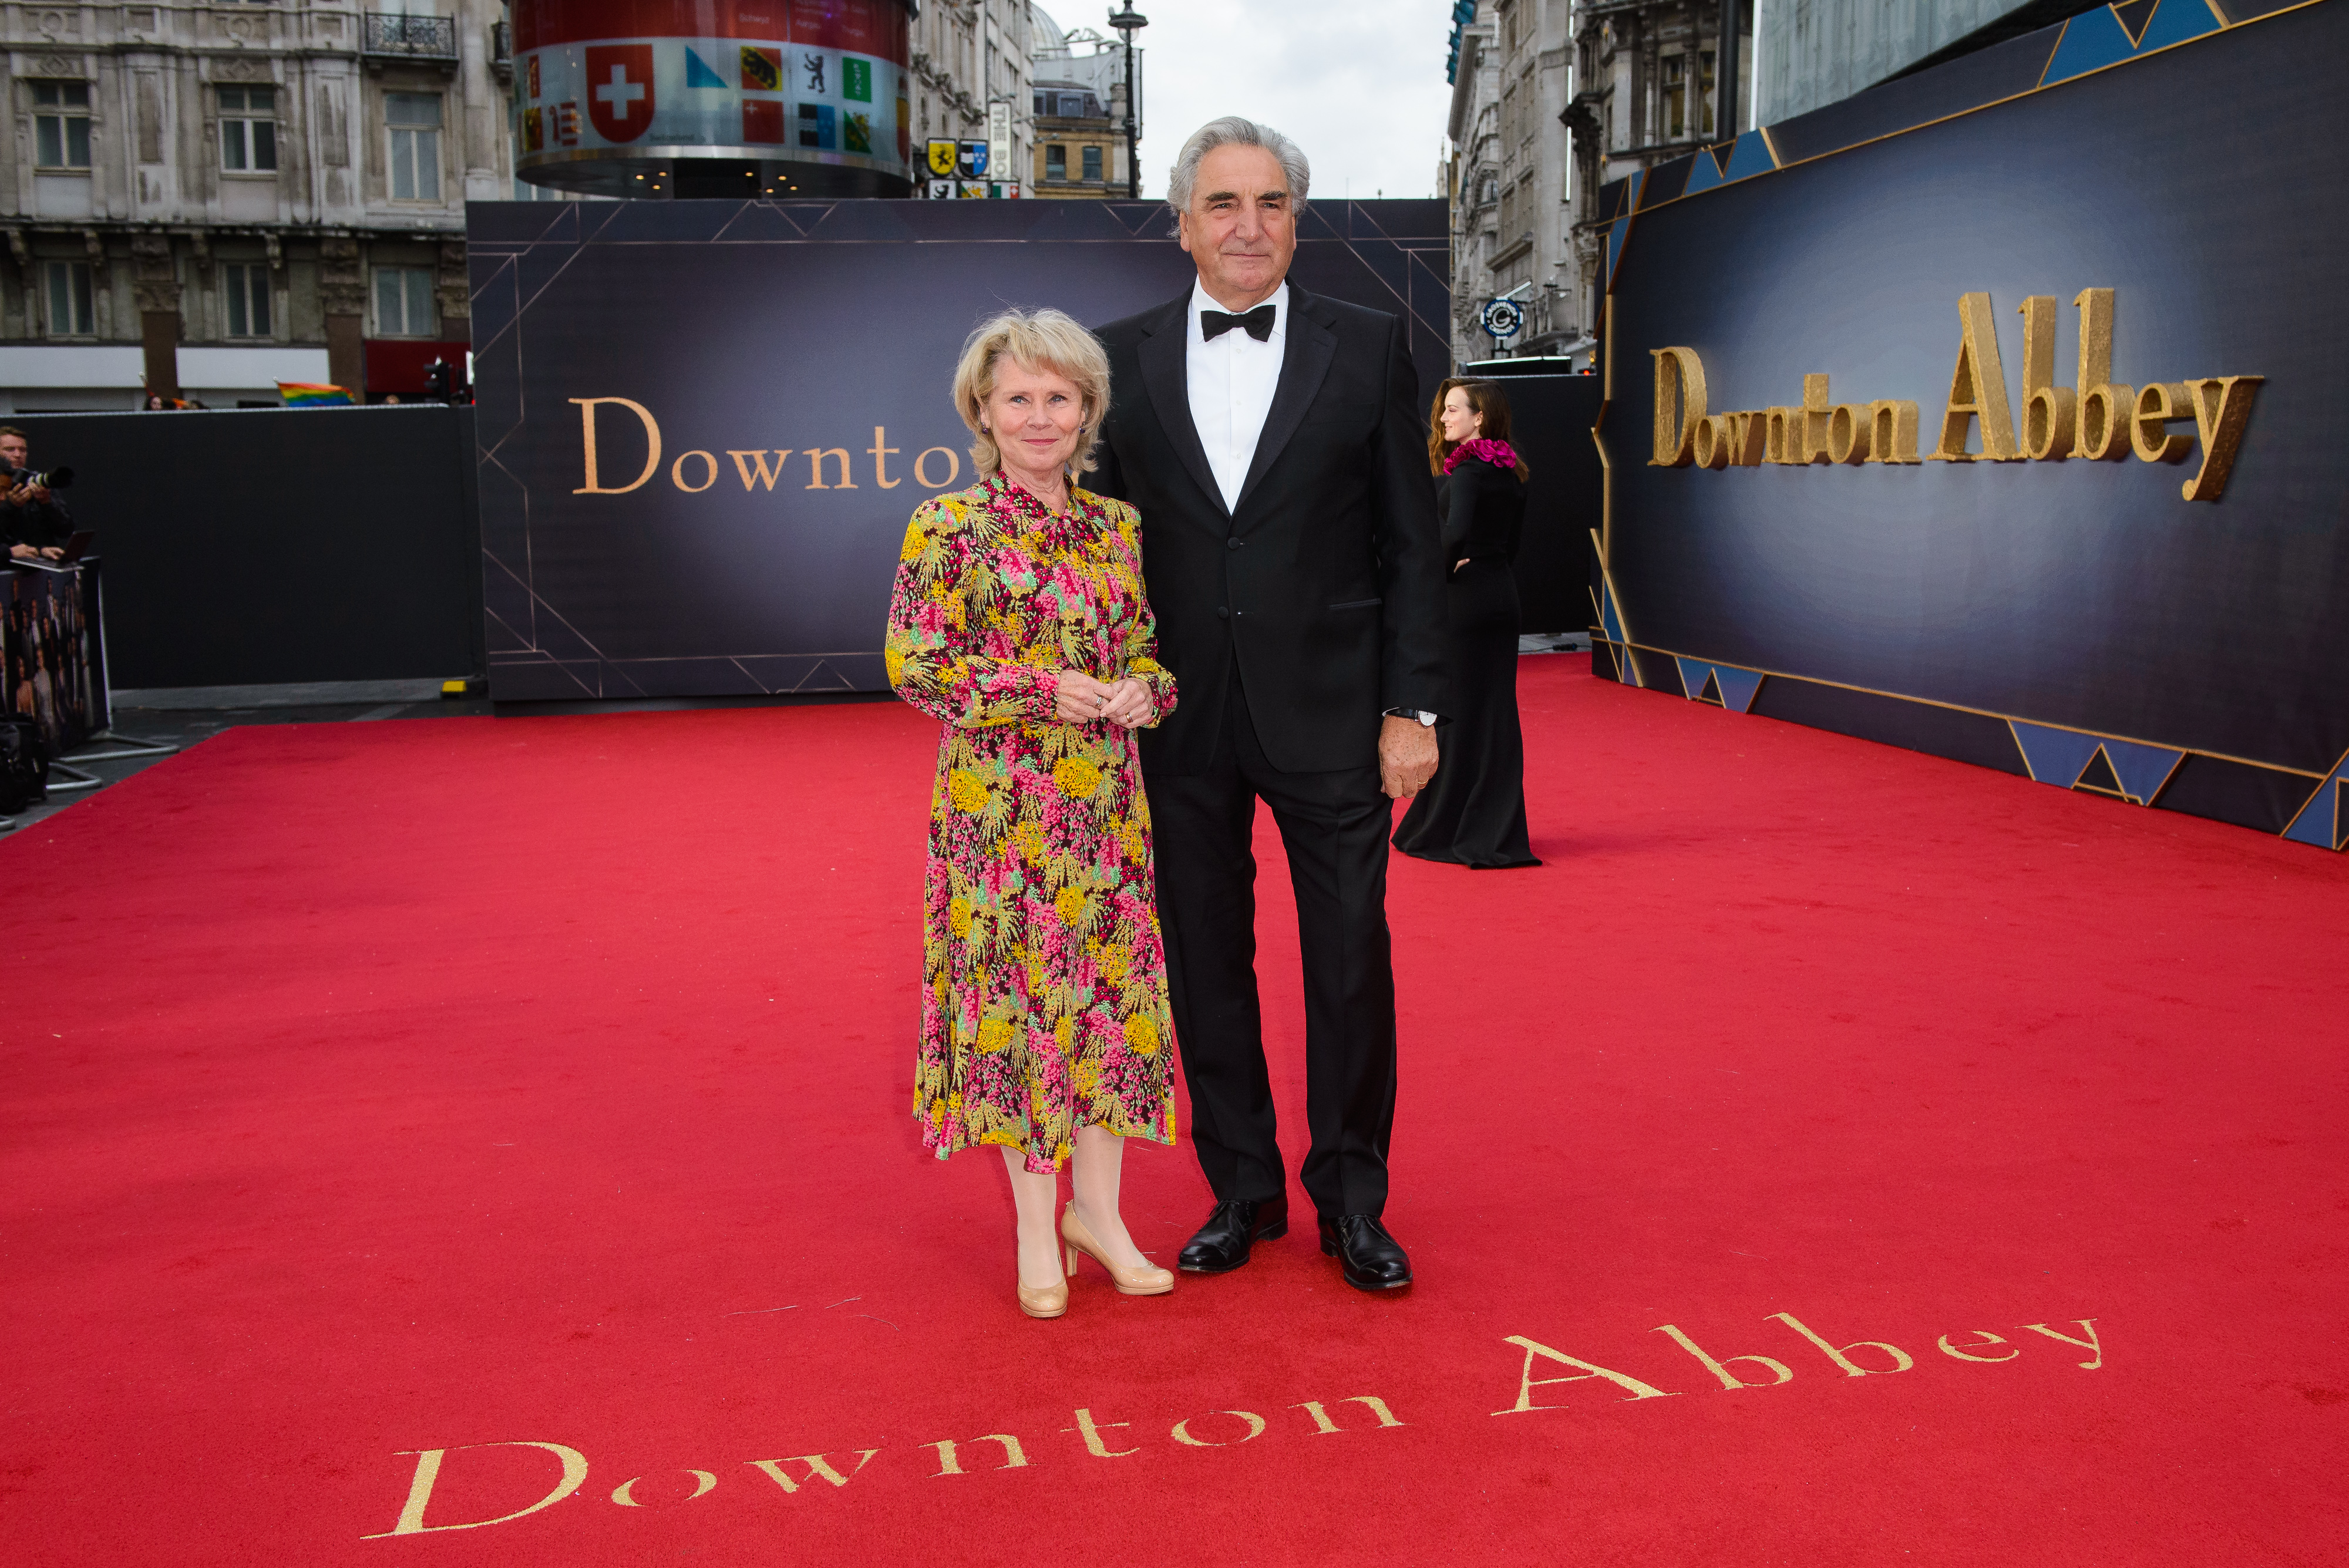 Imelda Staunton and Jim Carter at the premiere of "Downton Abbey" hosted at Cineworld Leicester Square in London, England, on September 09, 2019. | Source: Getty Images